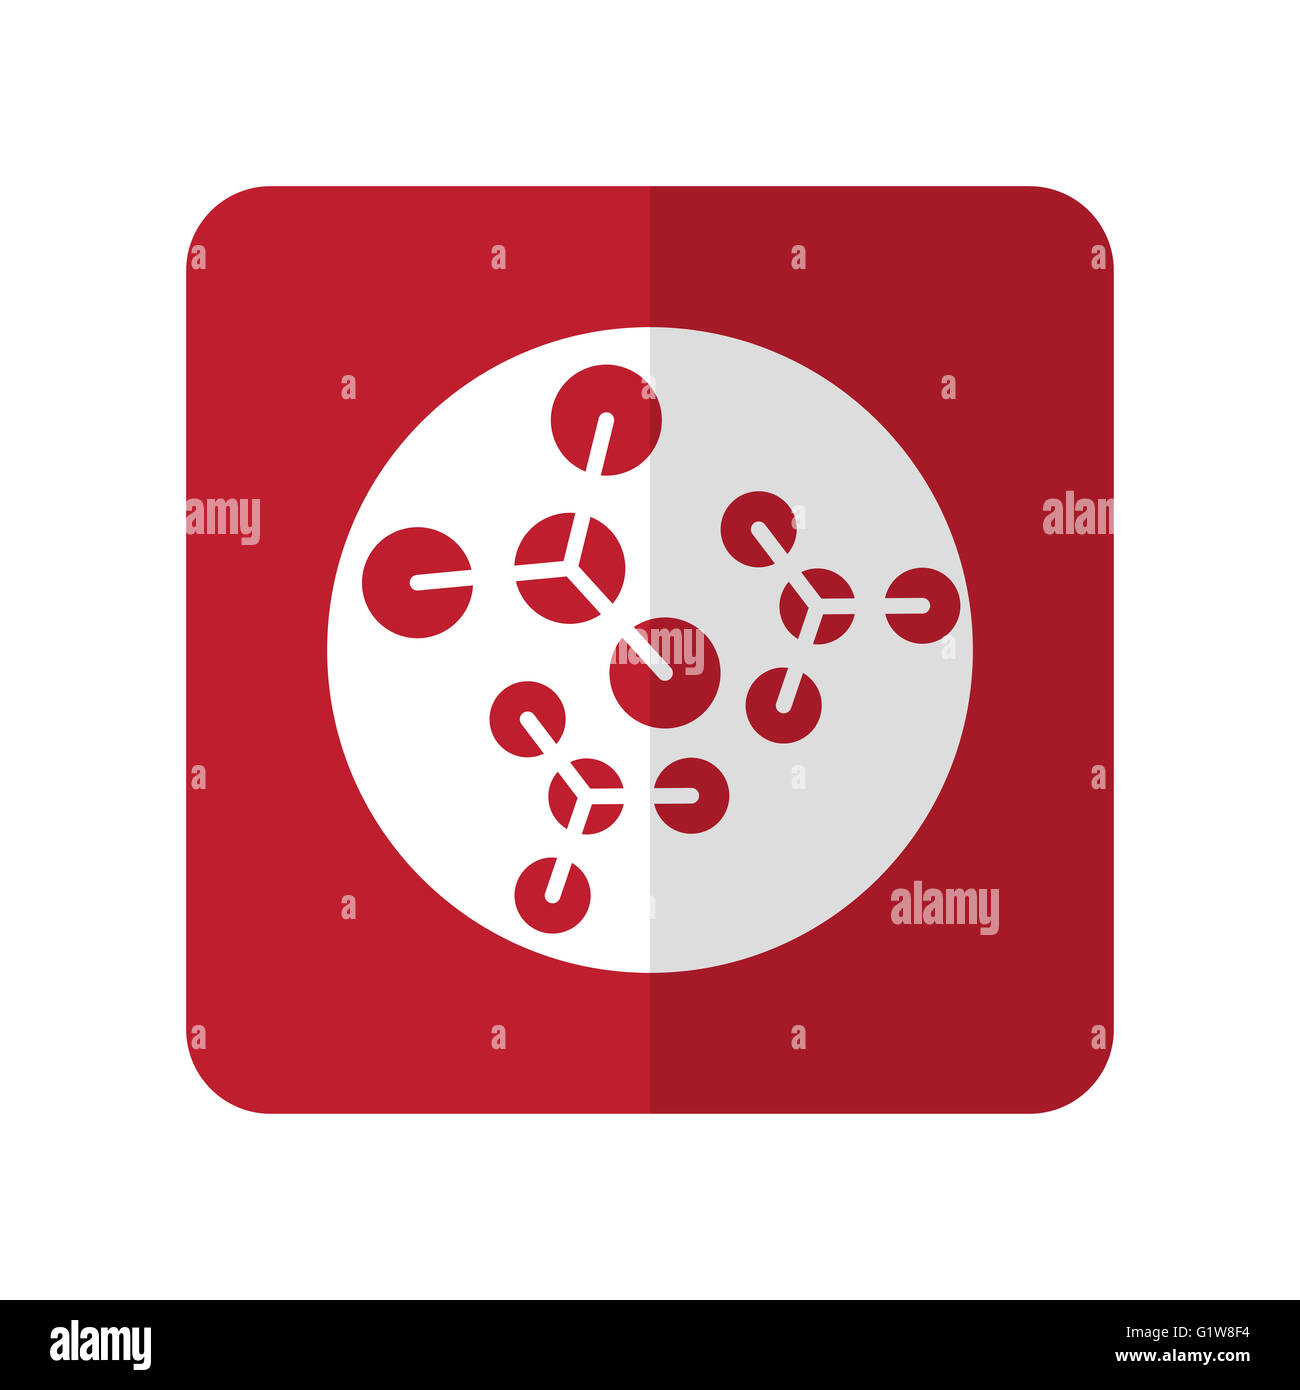 White Molecules flat icon on red rounded square on white Stock Photo